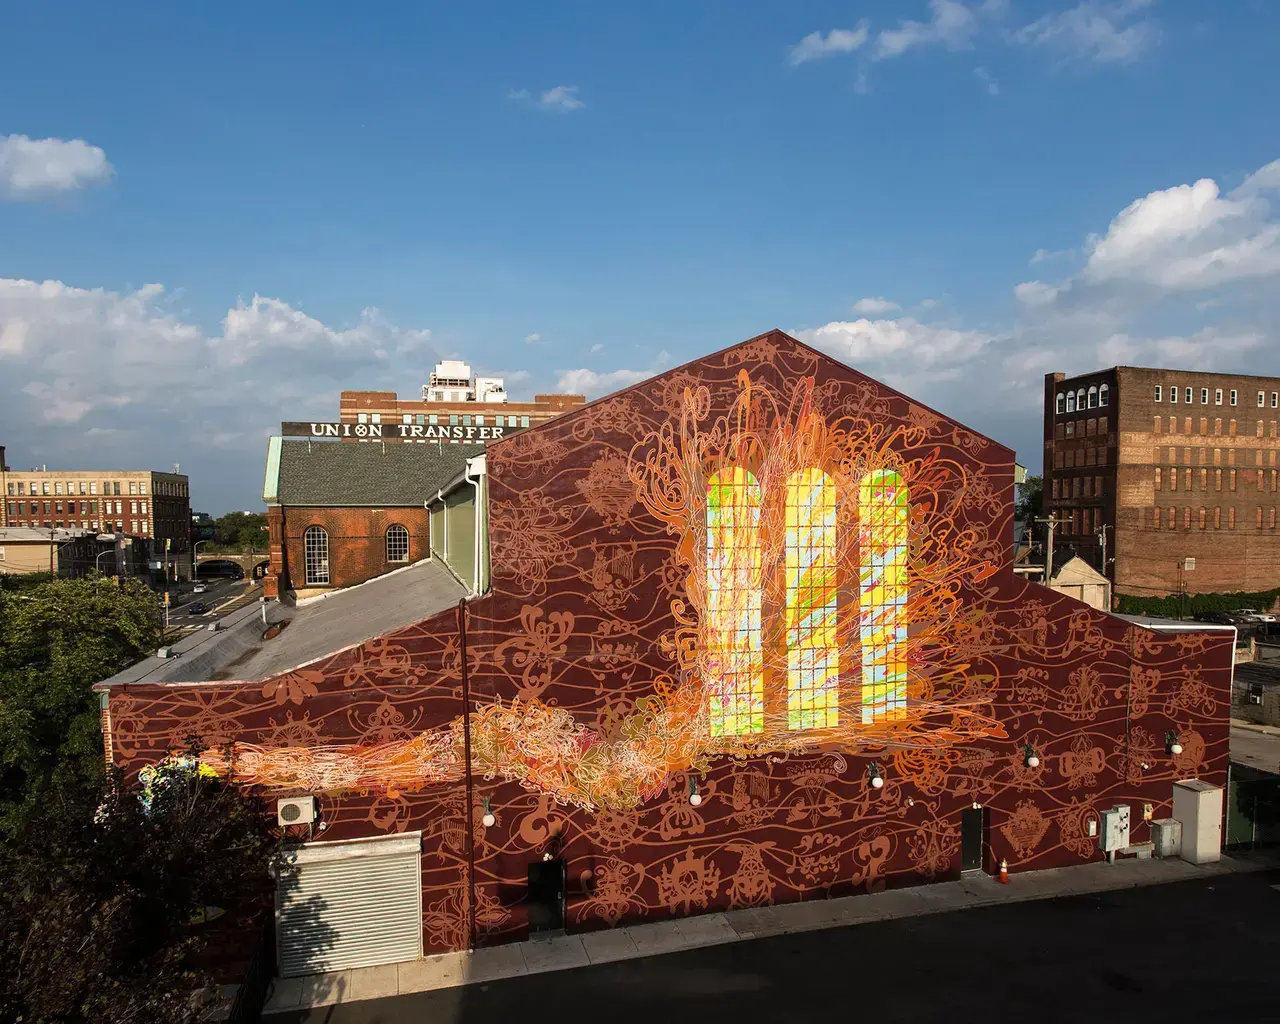 Benjamin Volta, Amplify, 2014. Mural for the Union Transfer music venue in the Spring Garden neighborhood of Philadelphia. Created with young adults at my studio in partnership with The Restorative Justice GUILD / The City of Philadelphia Mural Arts Program. Photo by Steve Weinik.